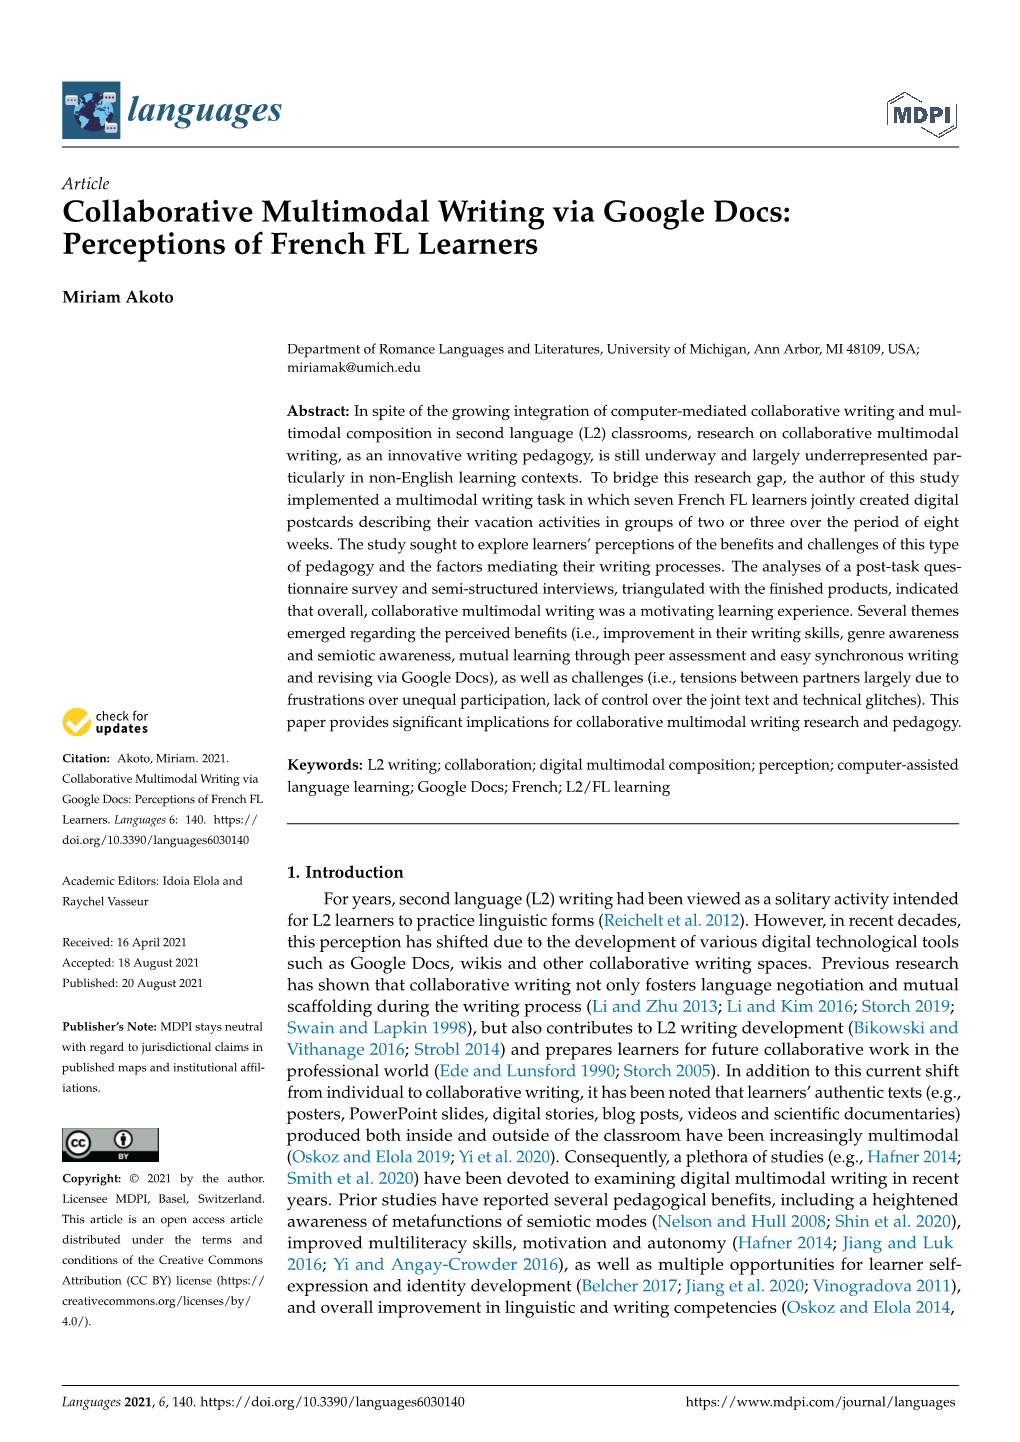 Collaborative Multimodal Writing Via Google Docs: Perceptions of French FL Learners